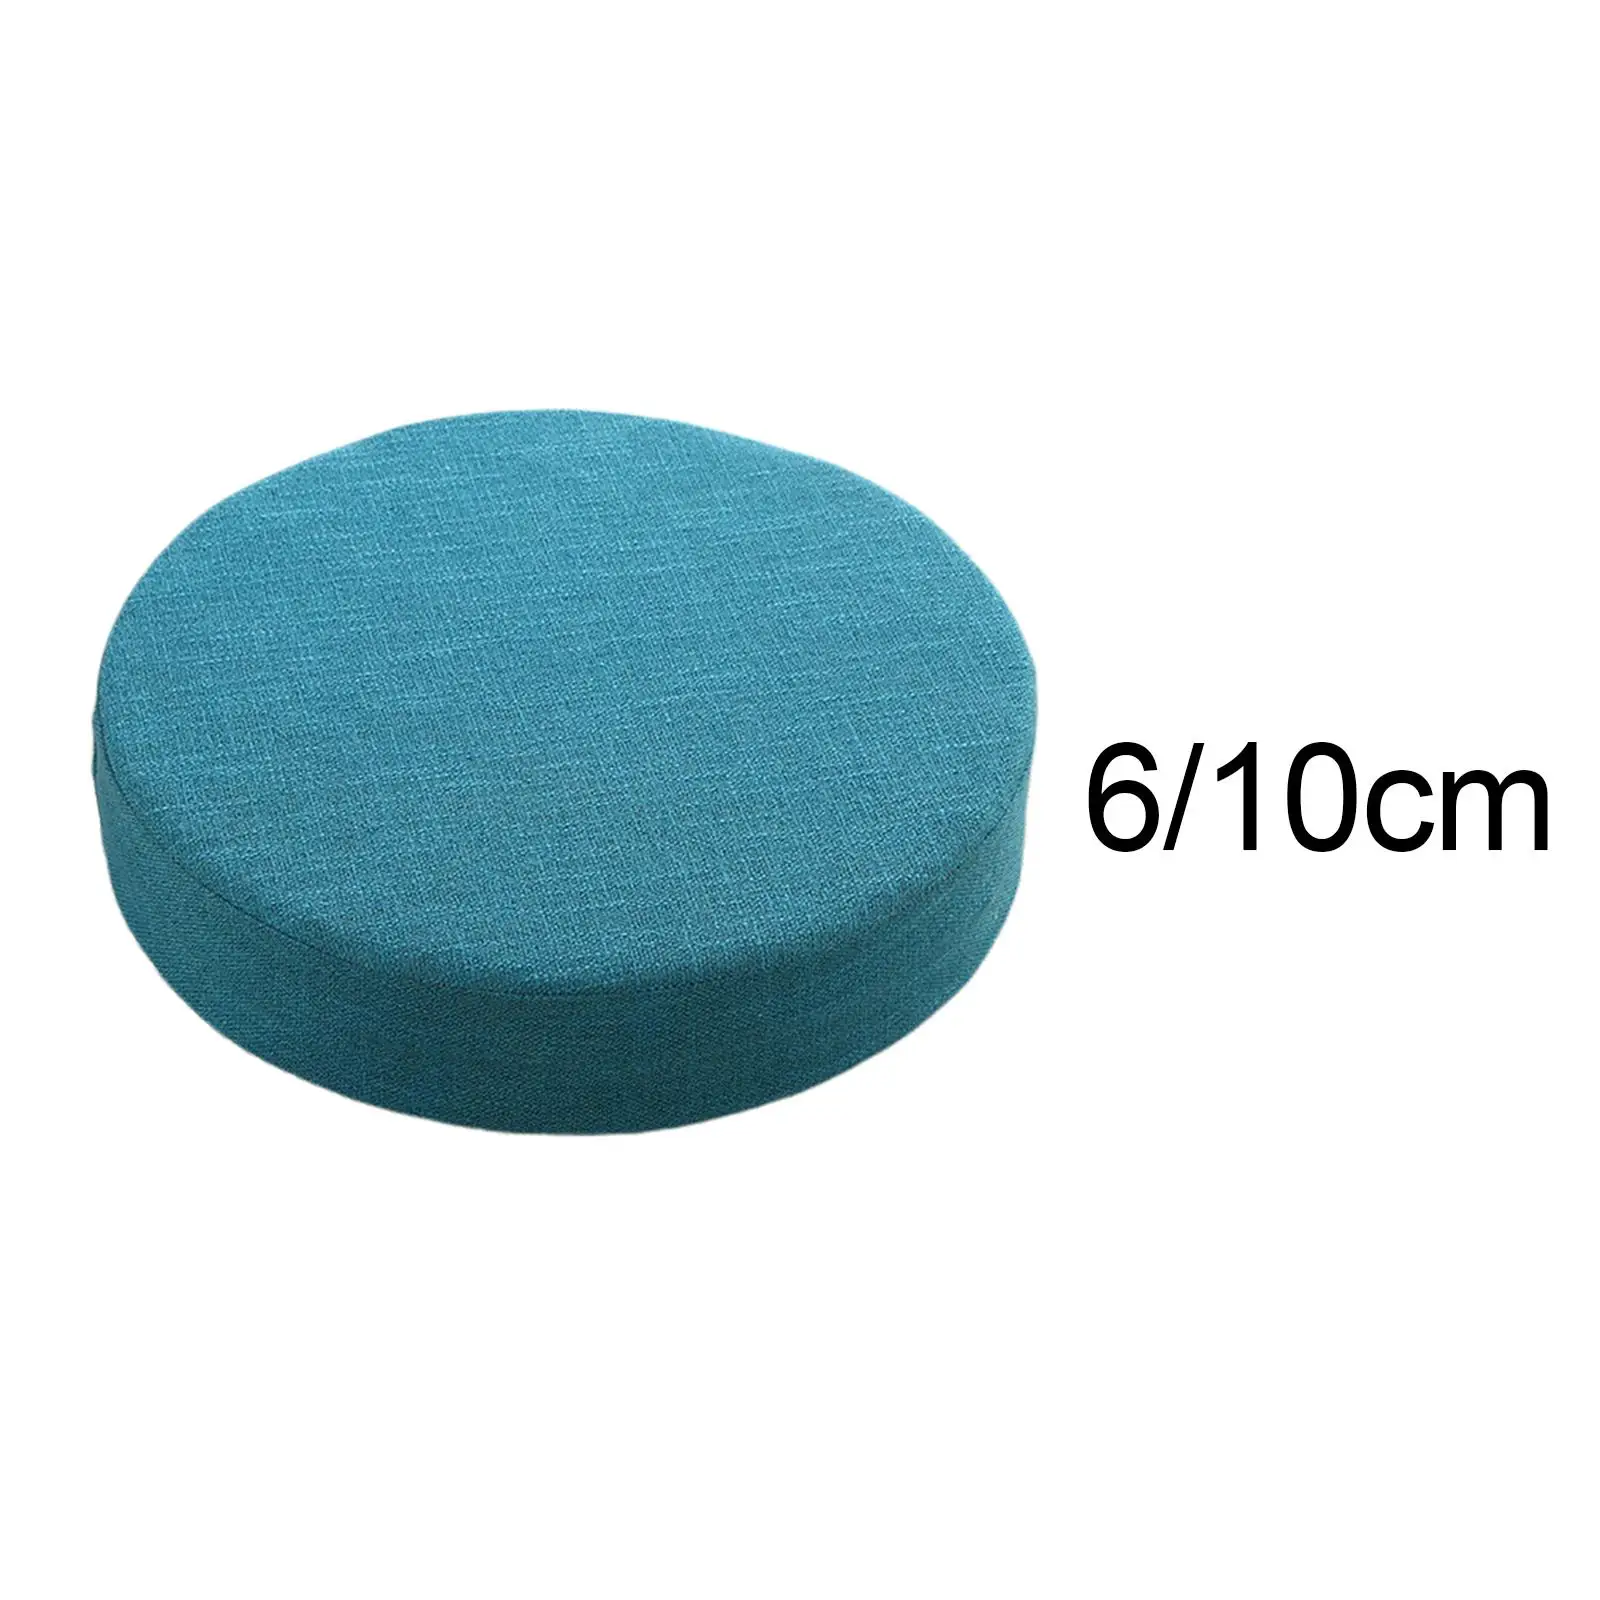 Outdoor Floor Cushions Meditation Floor Pillows Seating for Adults Foam Round Pouffe Seat Natural Chair Pad for Room Outdoor